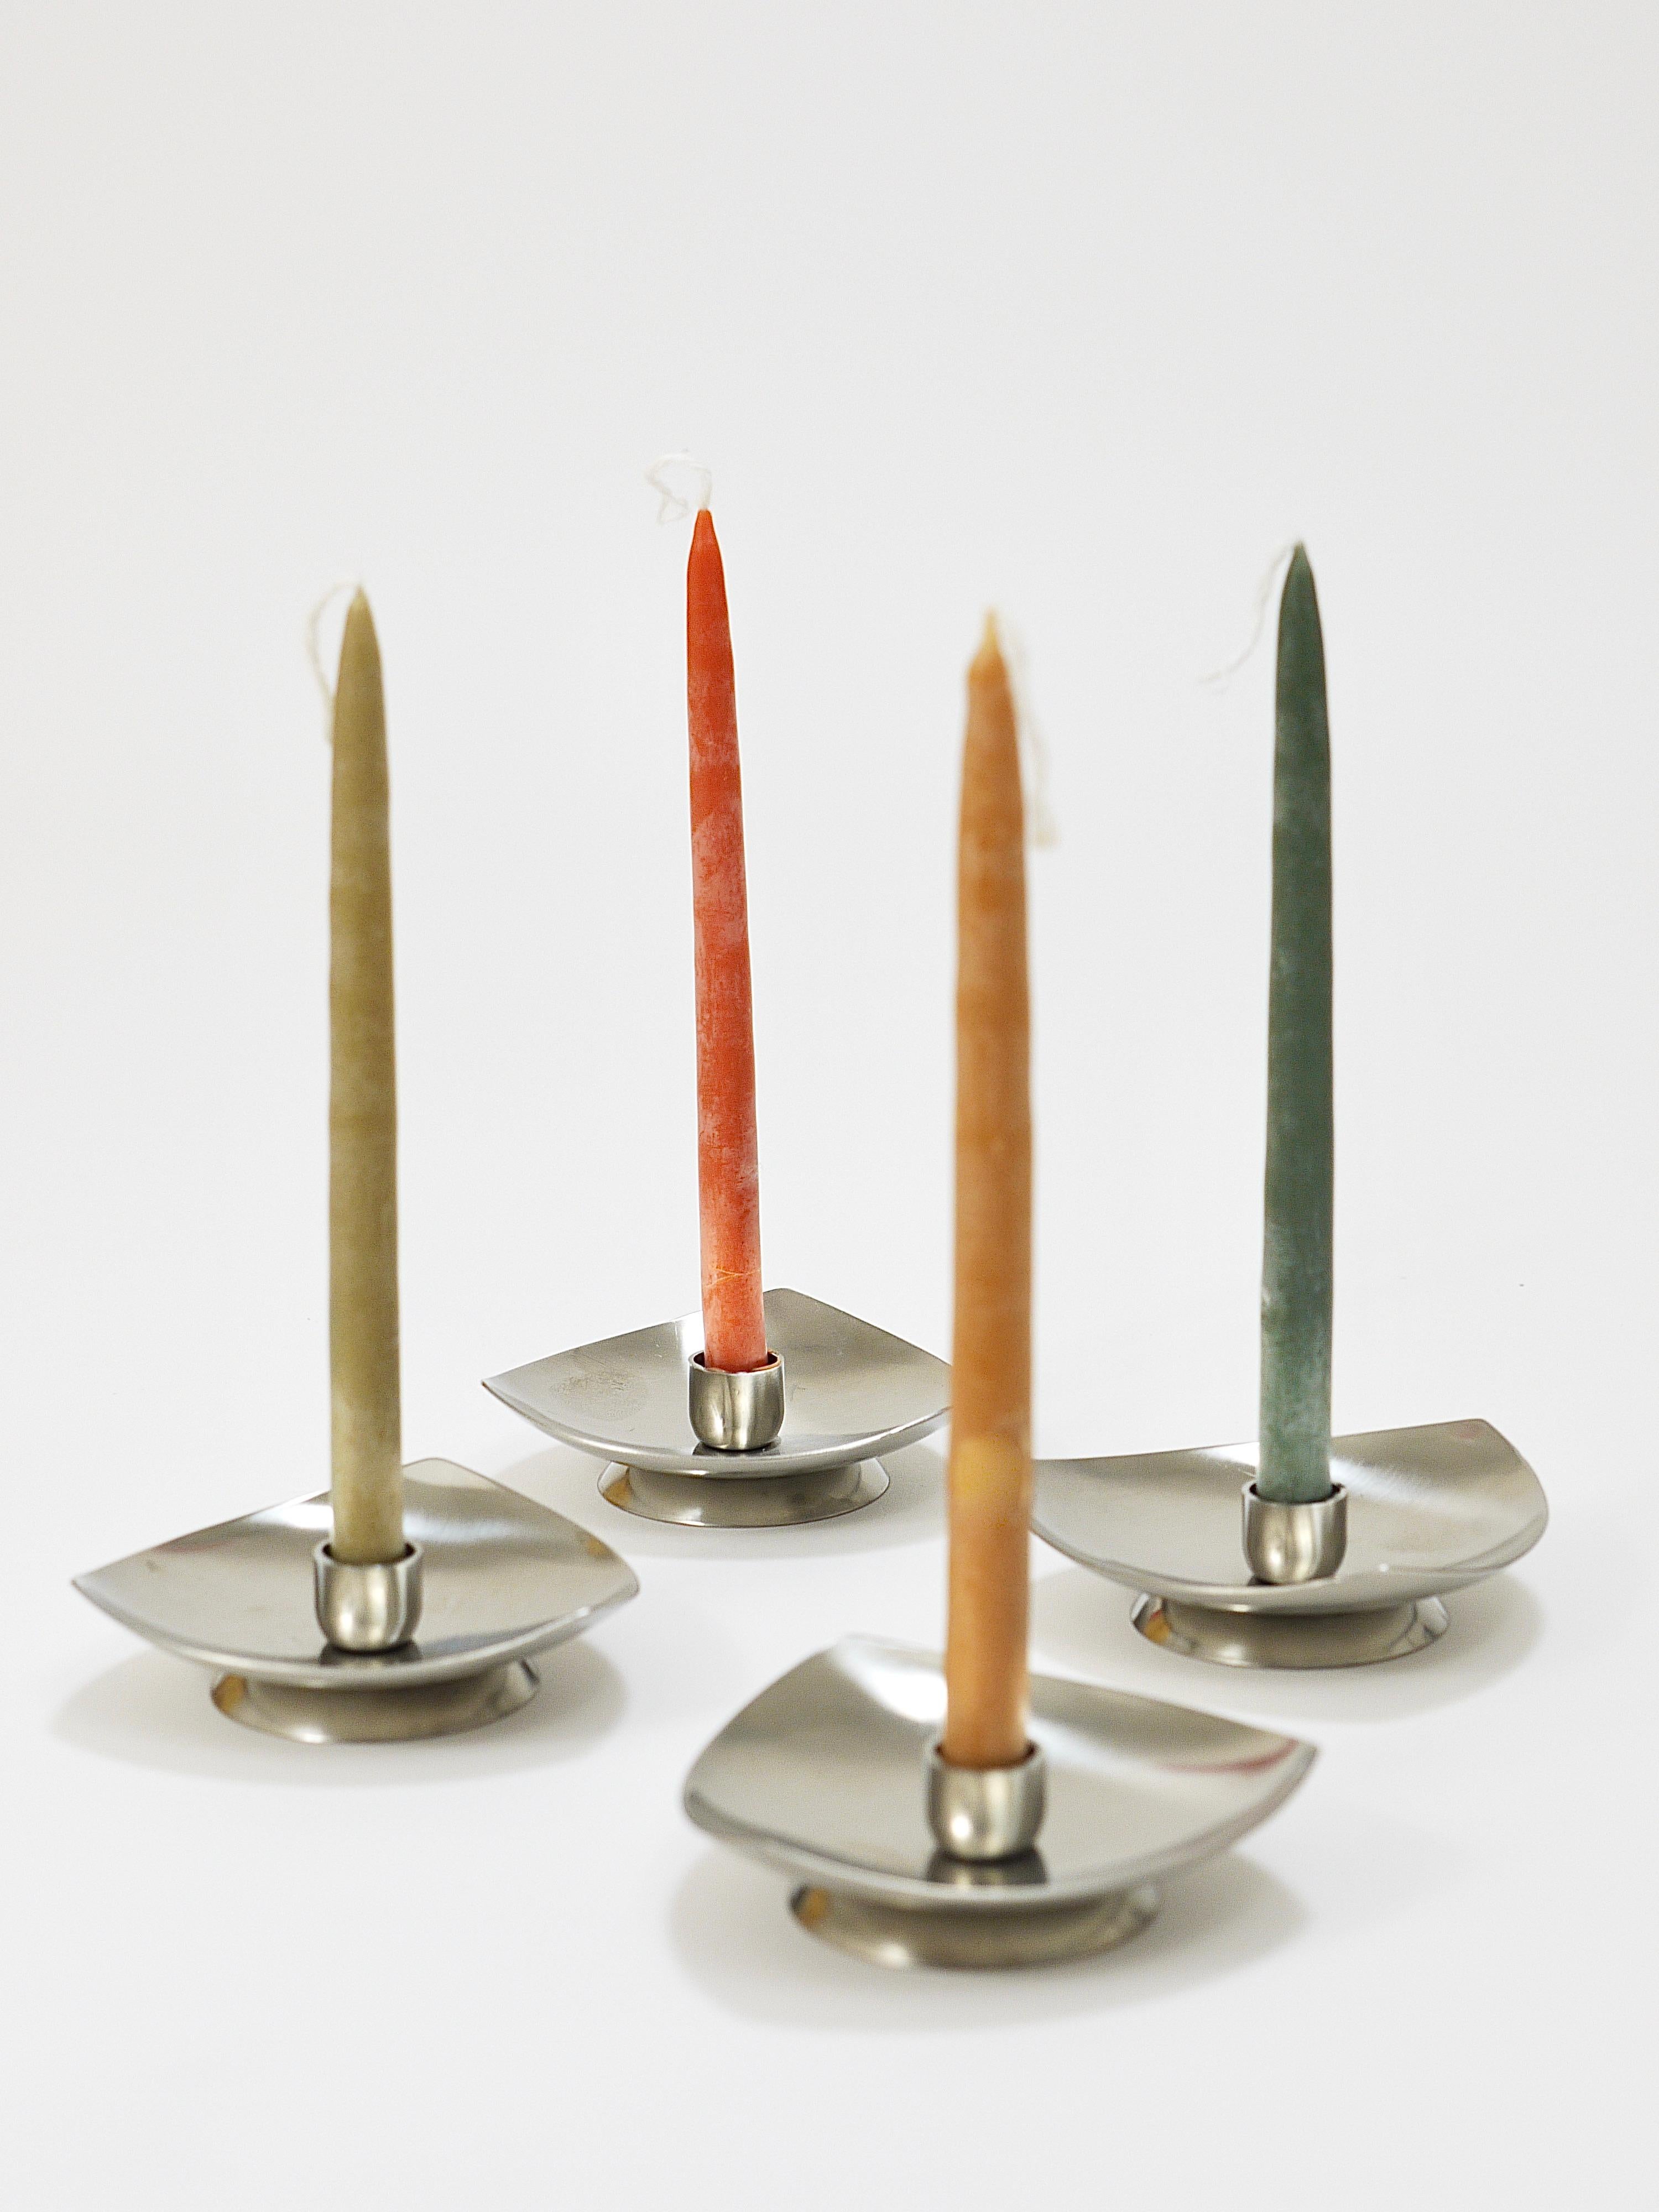 20th Century Up to 8 Arne Jacobsen Triangular Candle Holders by Stelton Denmark, 1960s For Sale